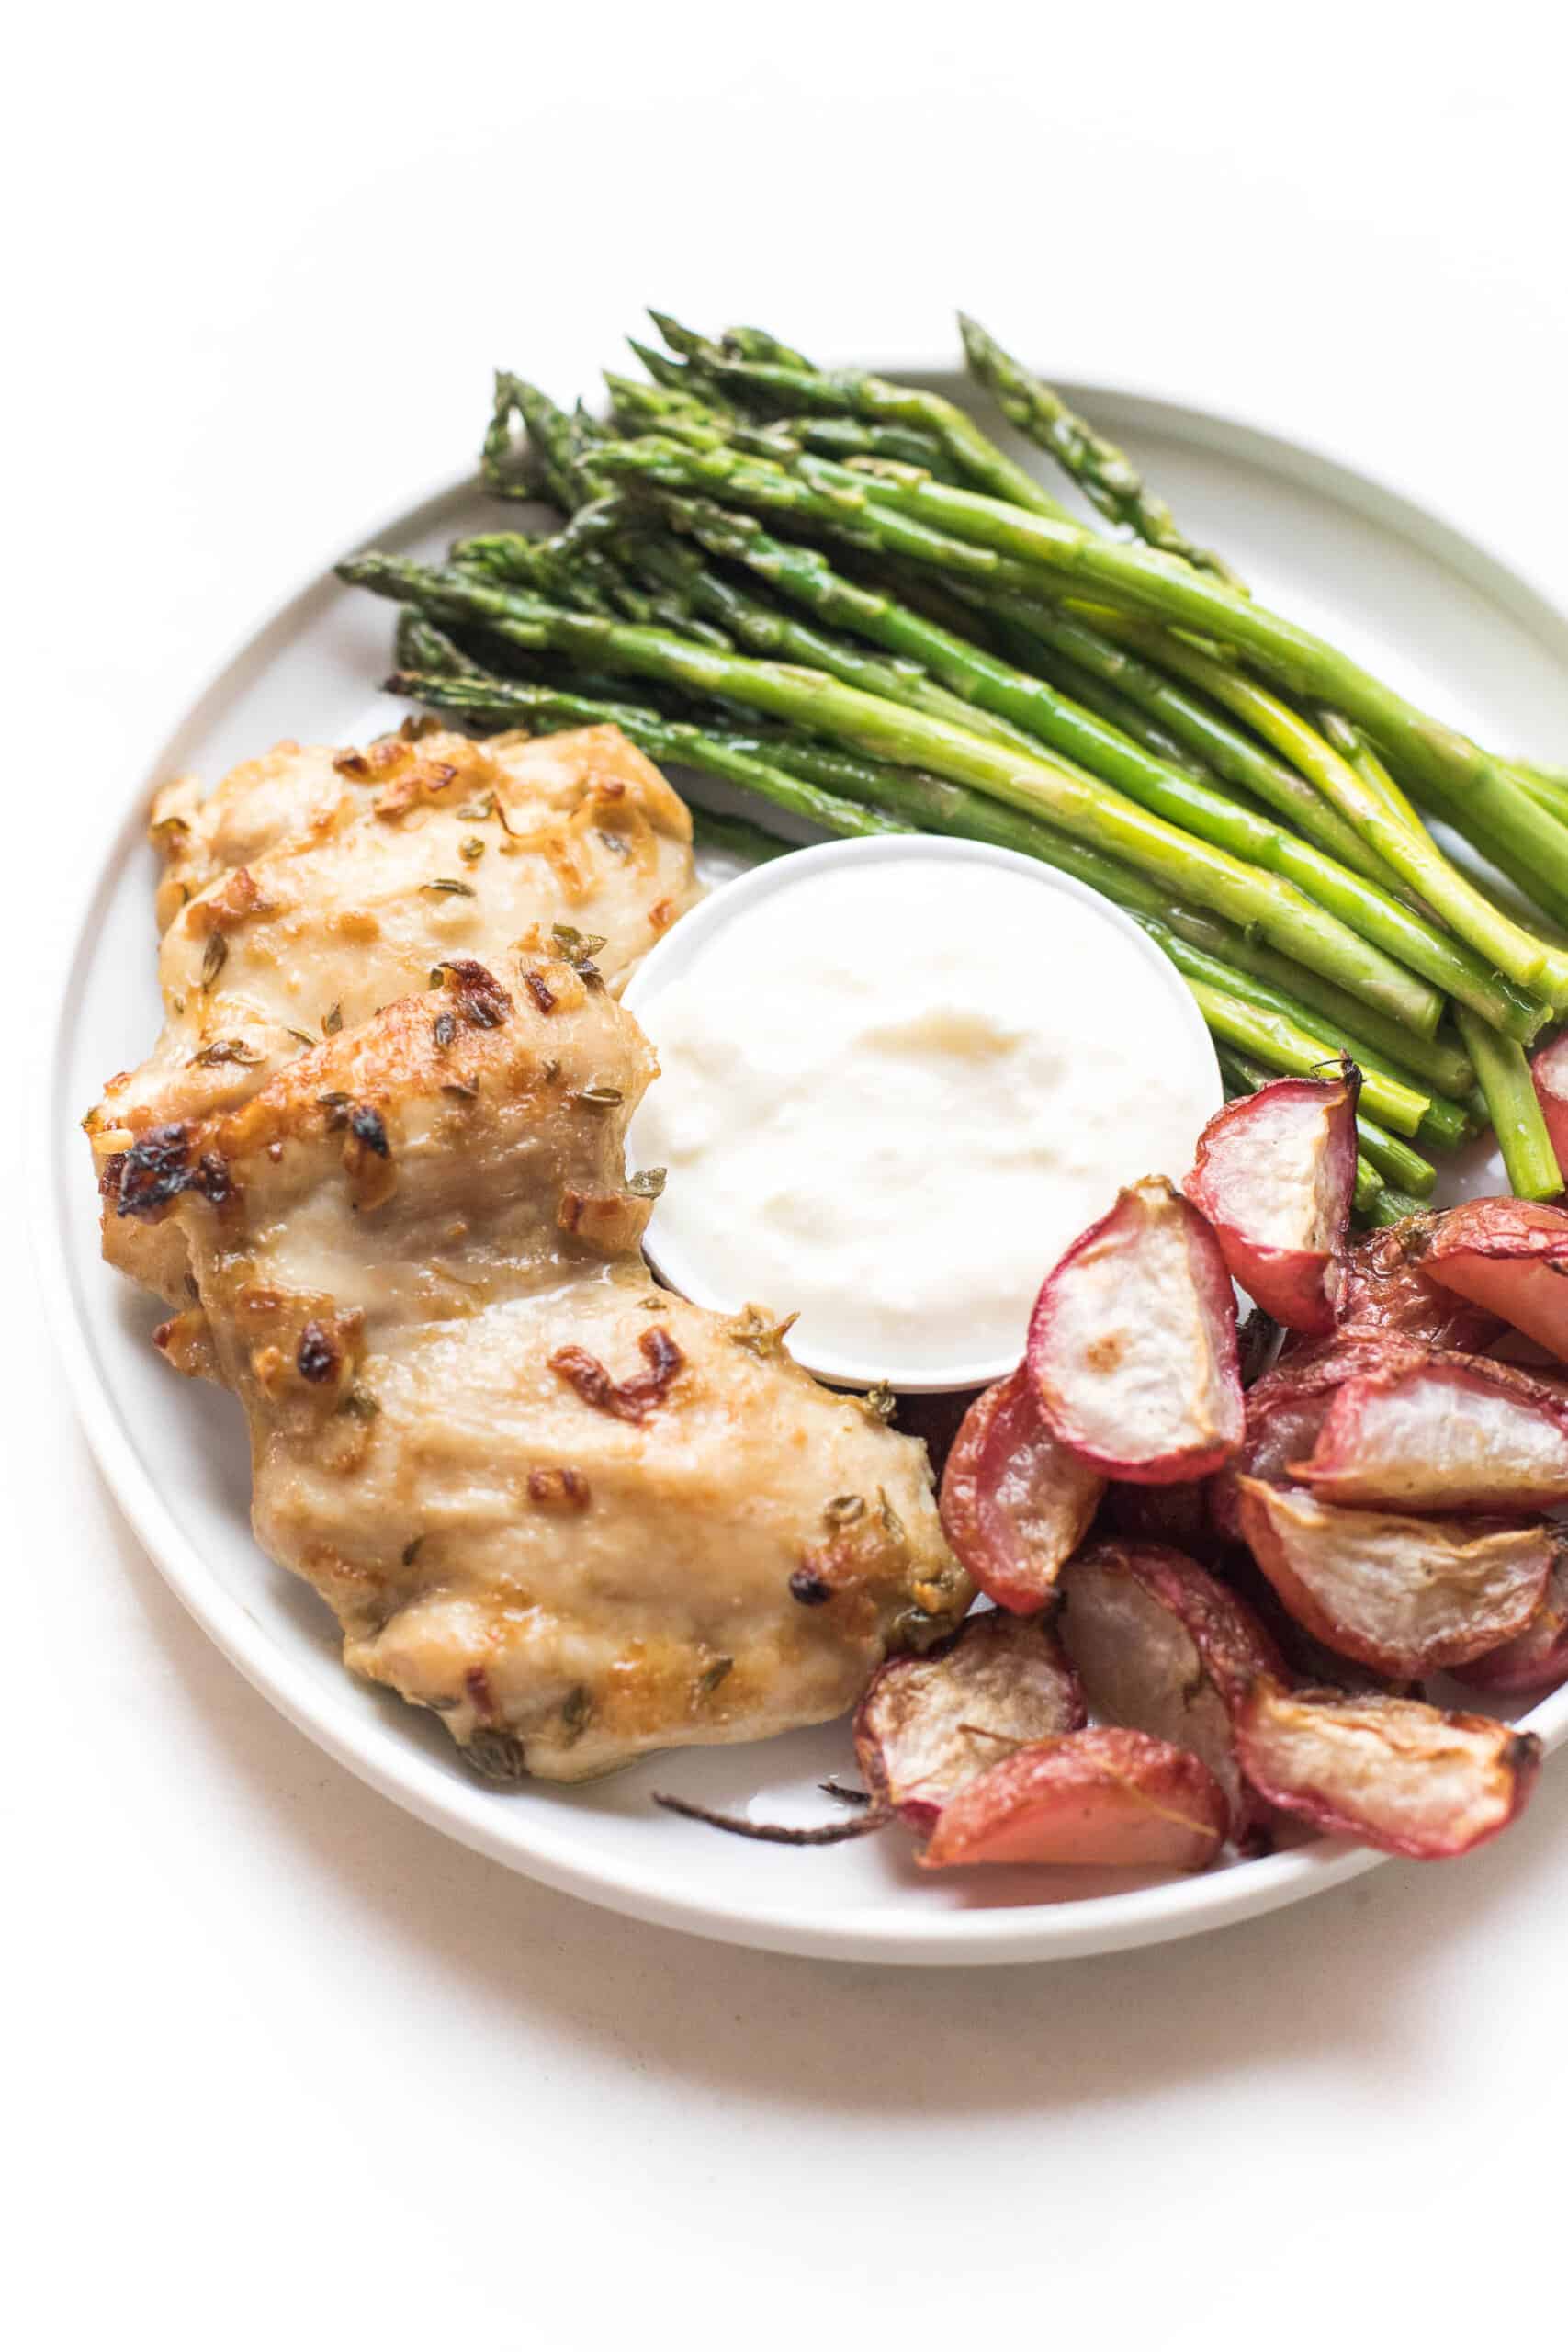 Dijon mustard chicken thighs with radishes, asparagus and yogurt feta dip on a white plate and background